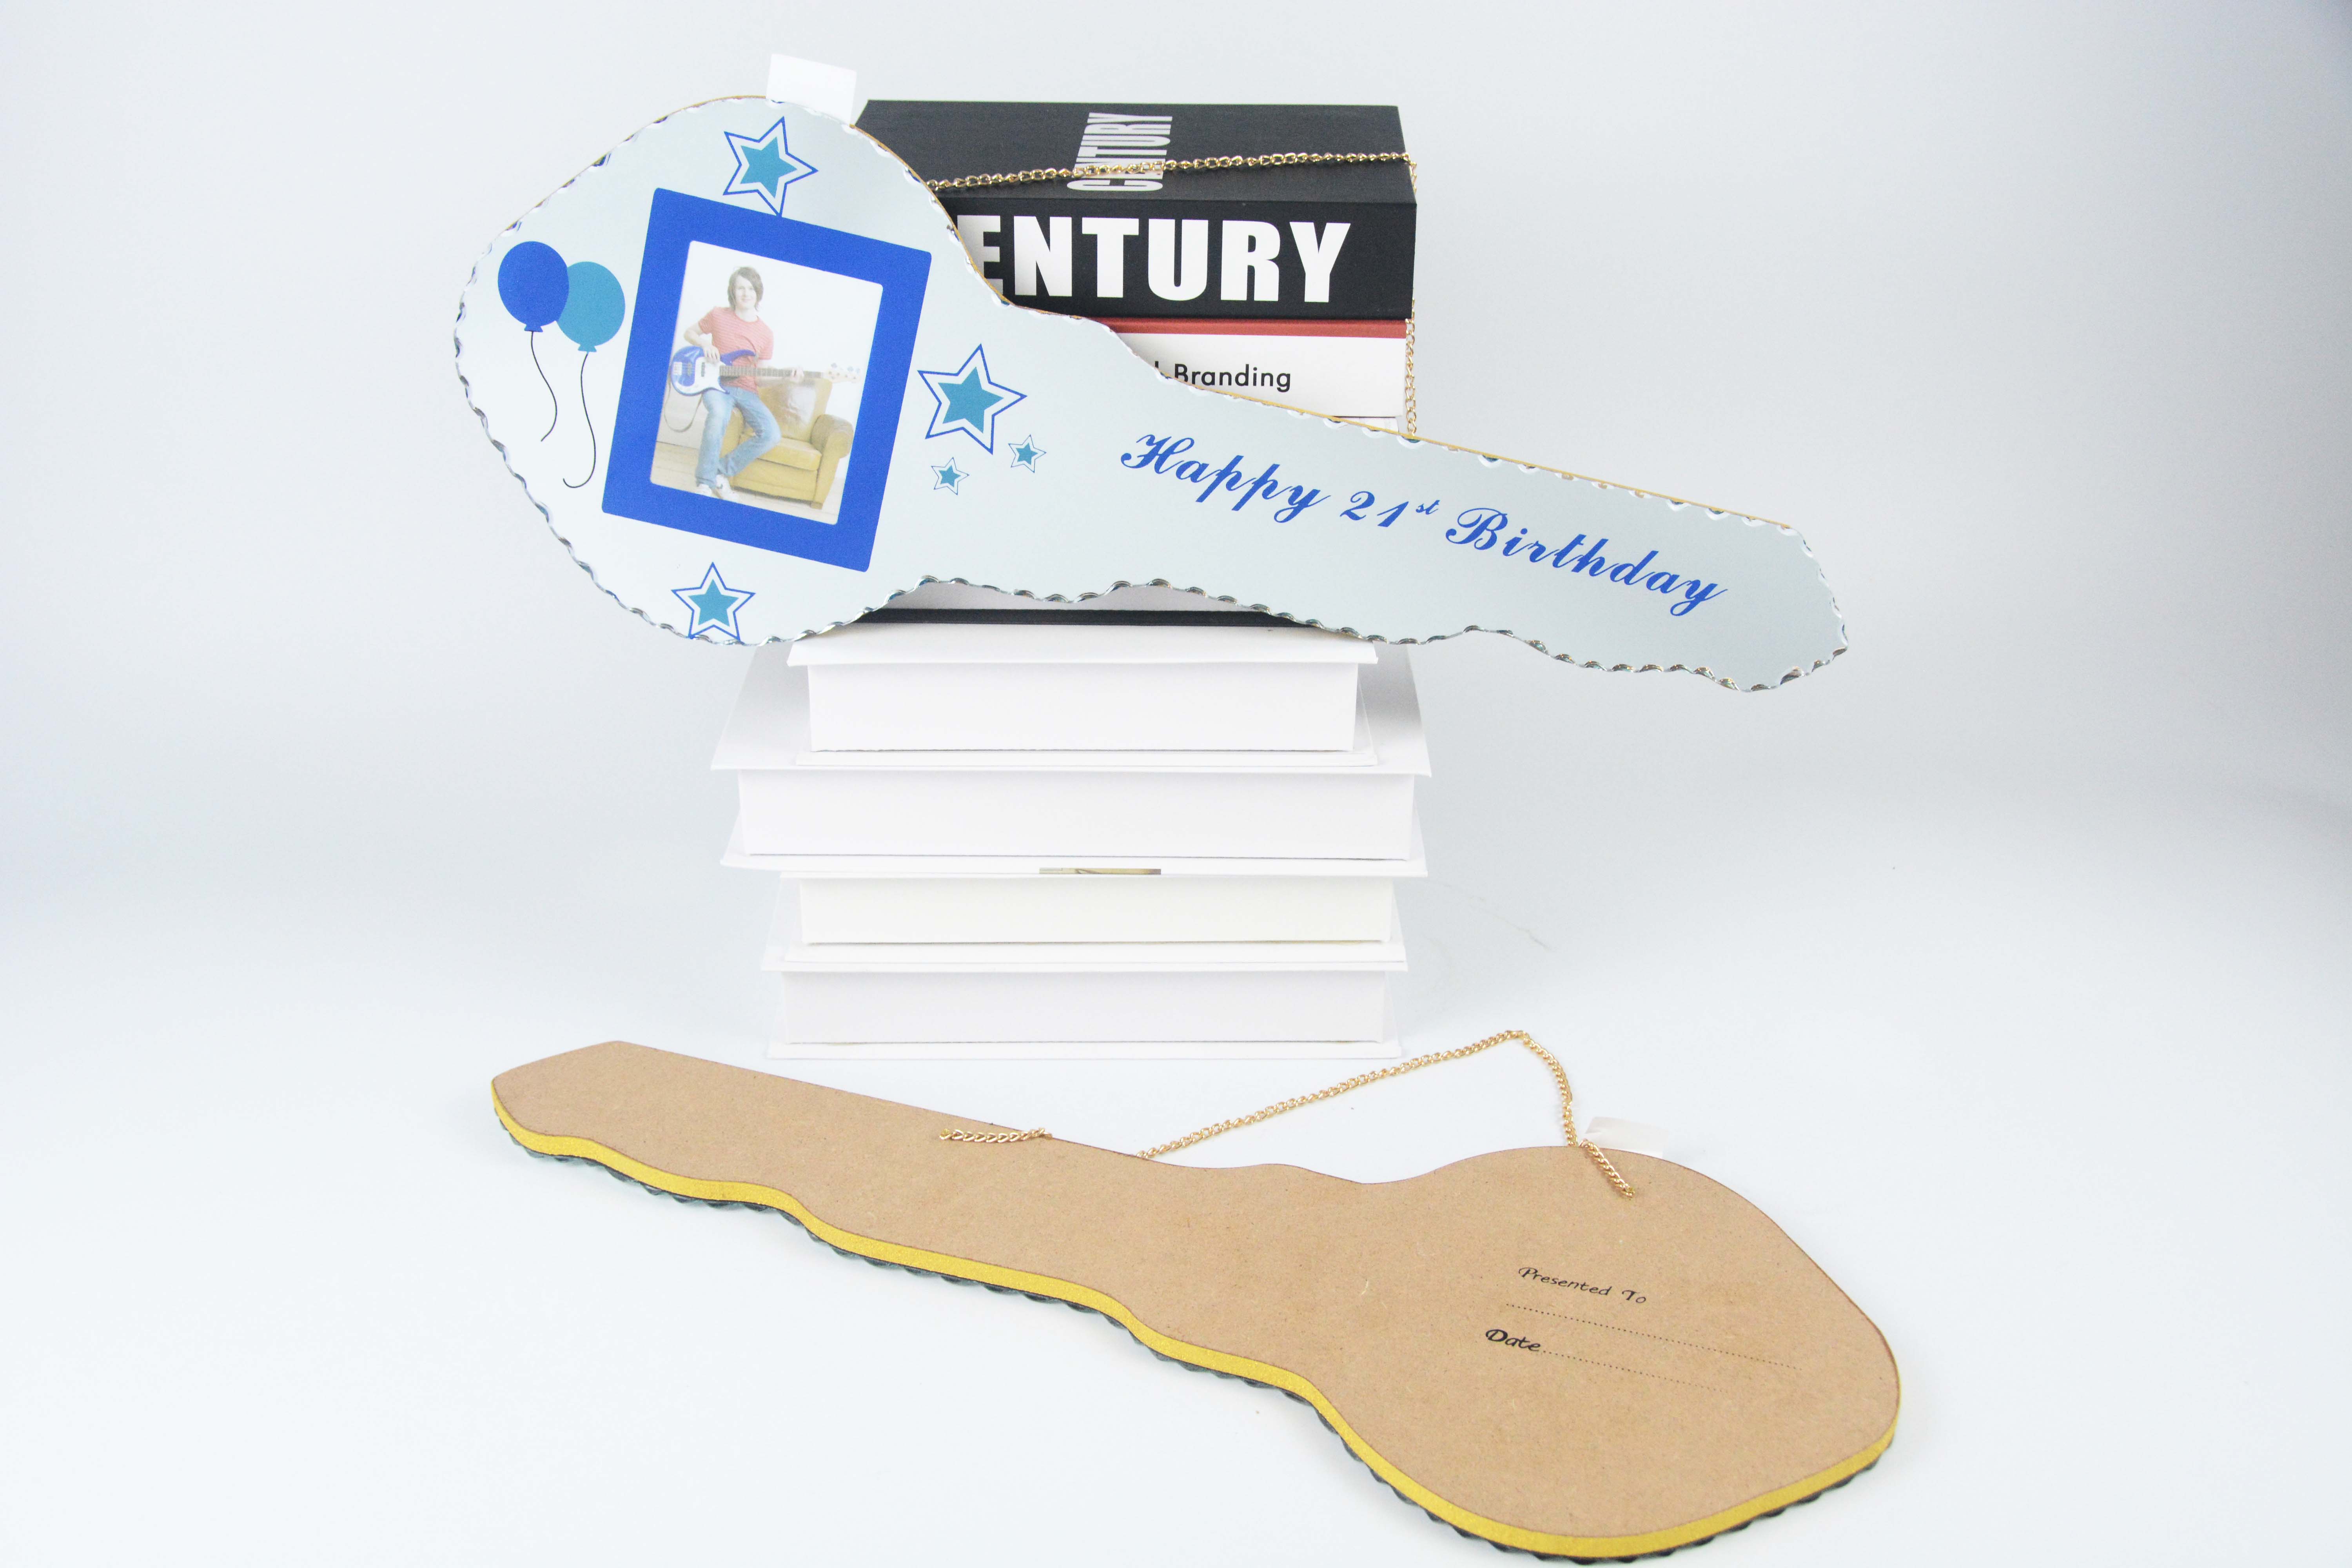 Happy 21st birthday 4x6" glass and wooden photo frame silk screen font with gold powder circled edges in key shape design